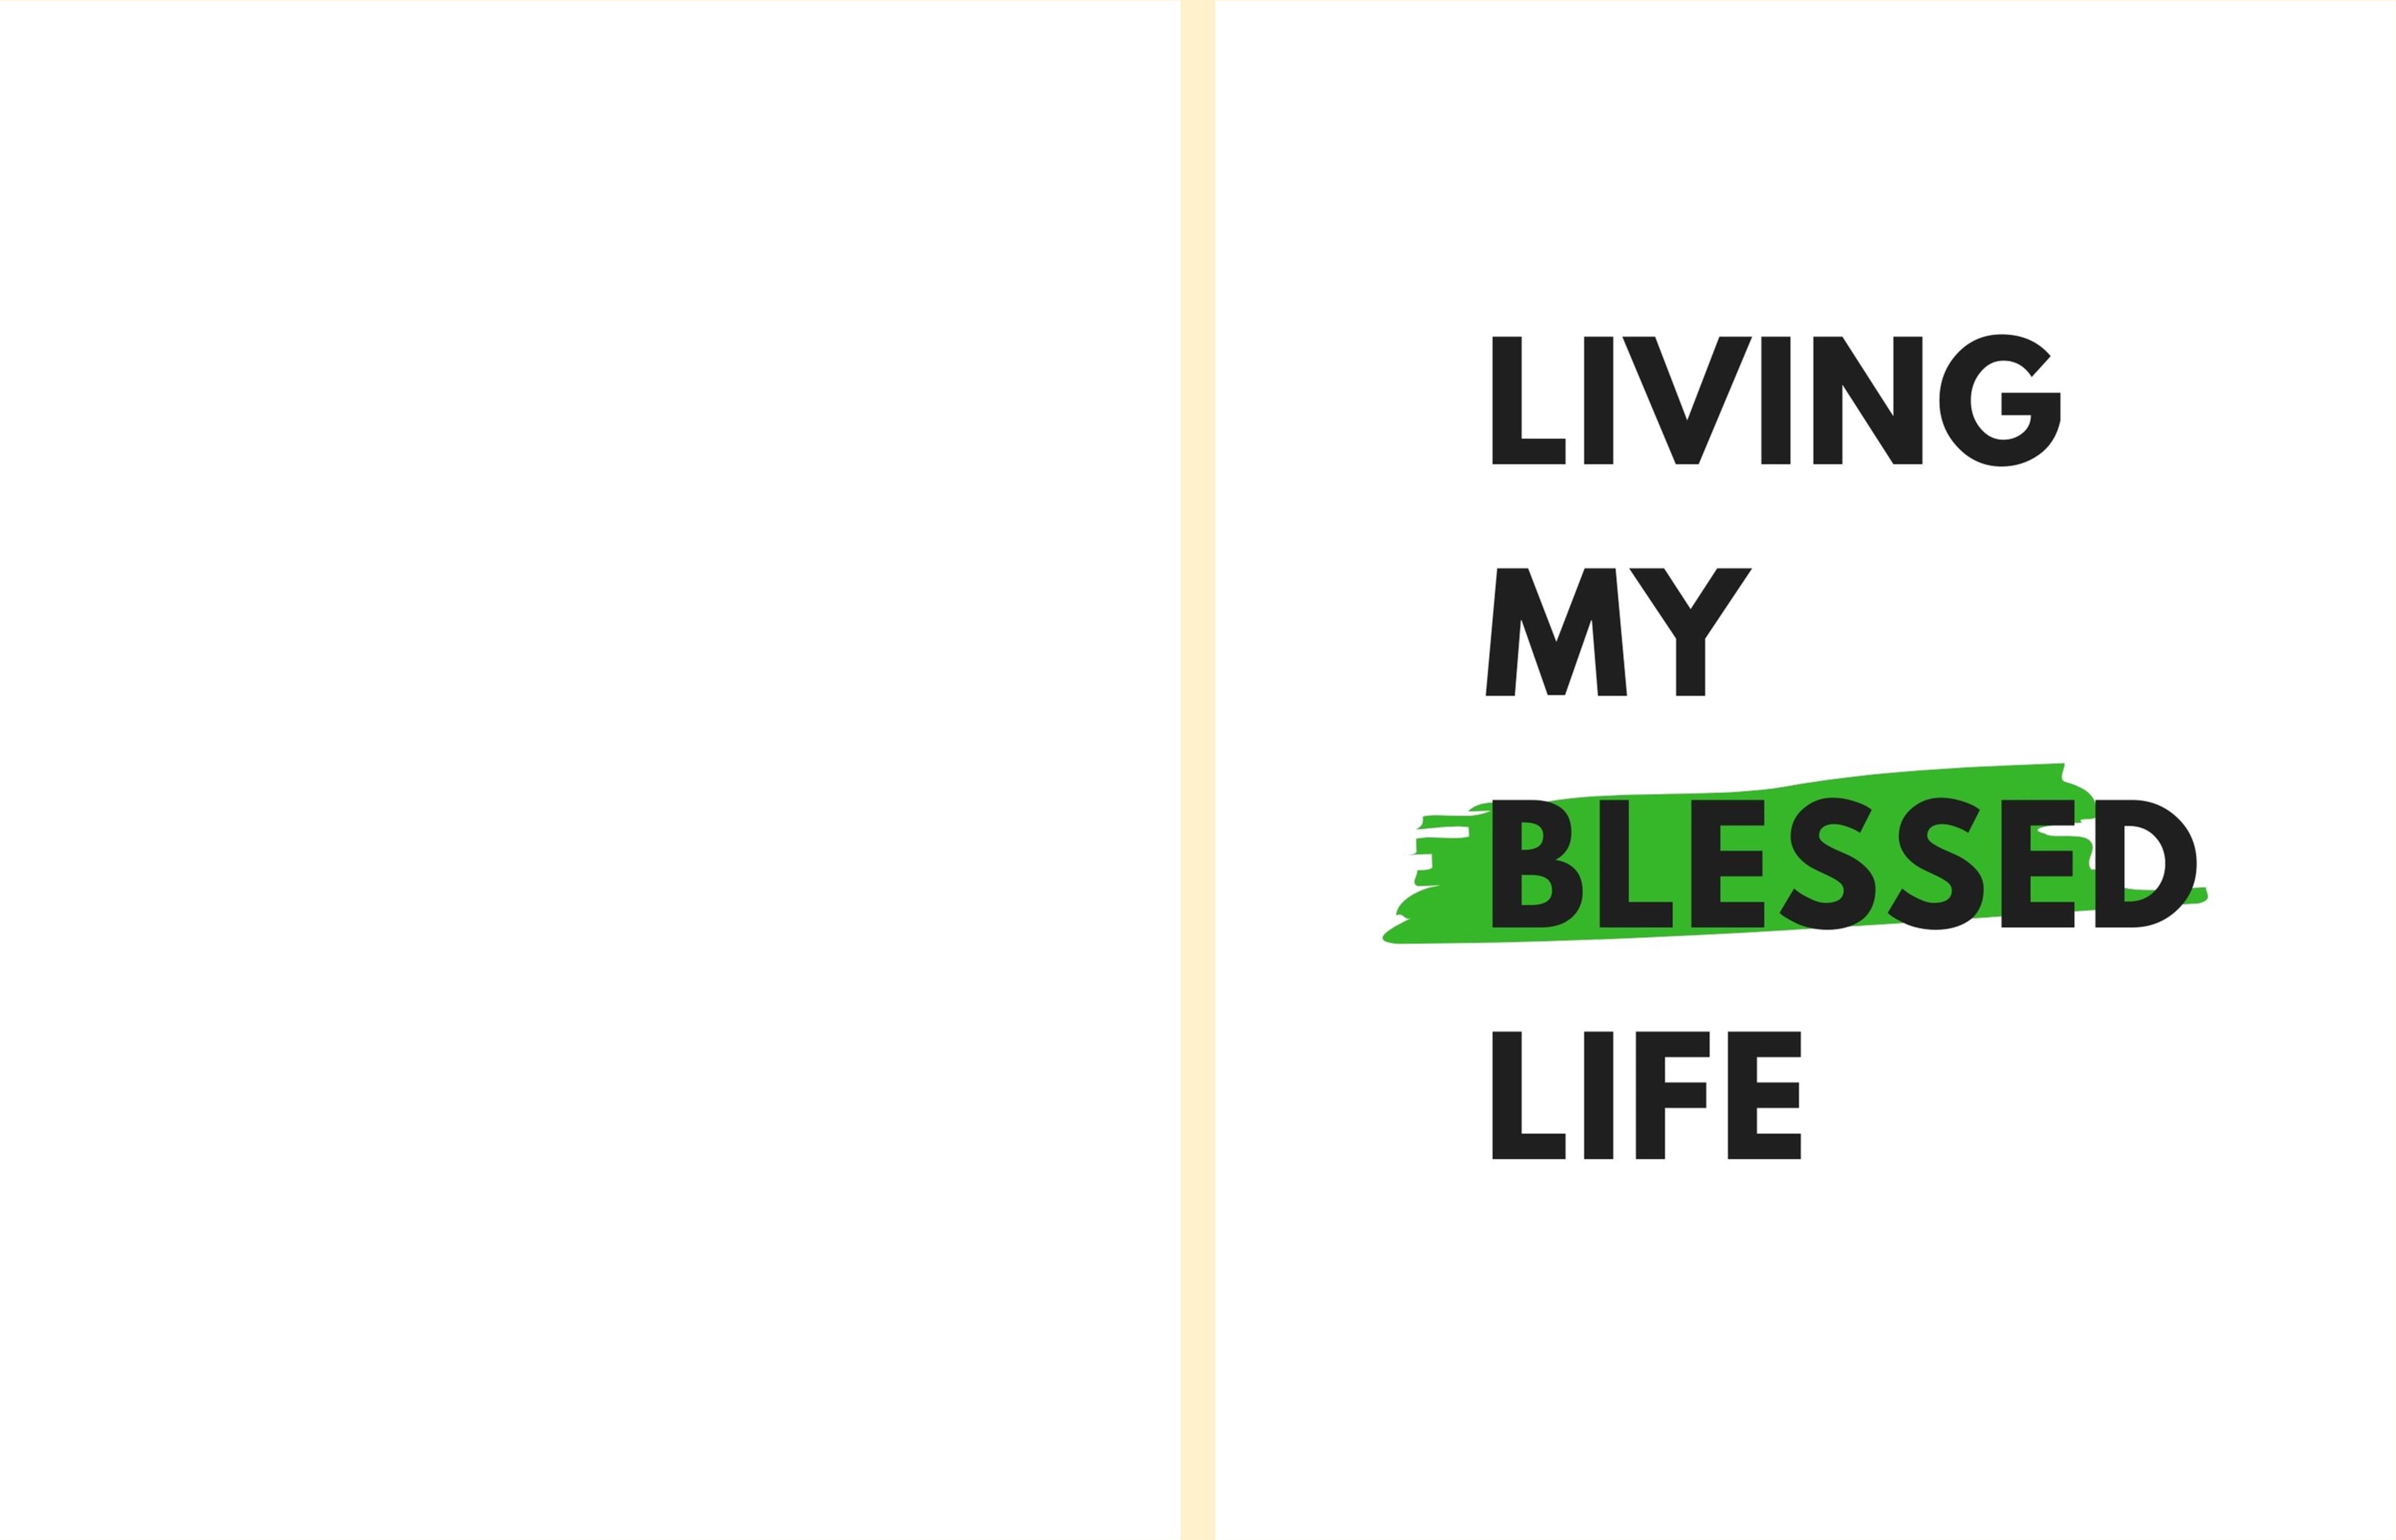 Blessed Life Notebook cover image